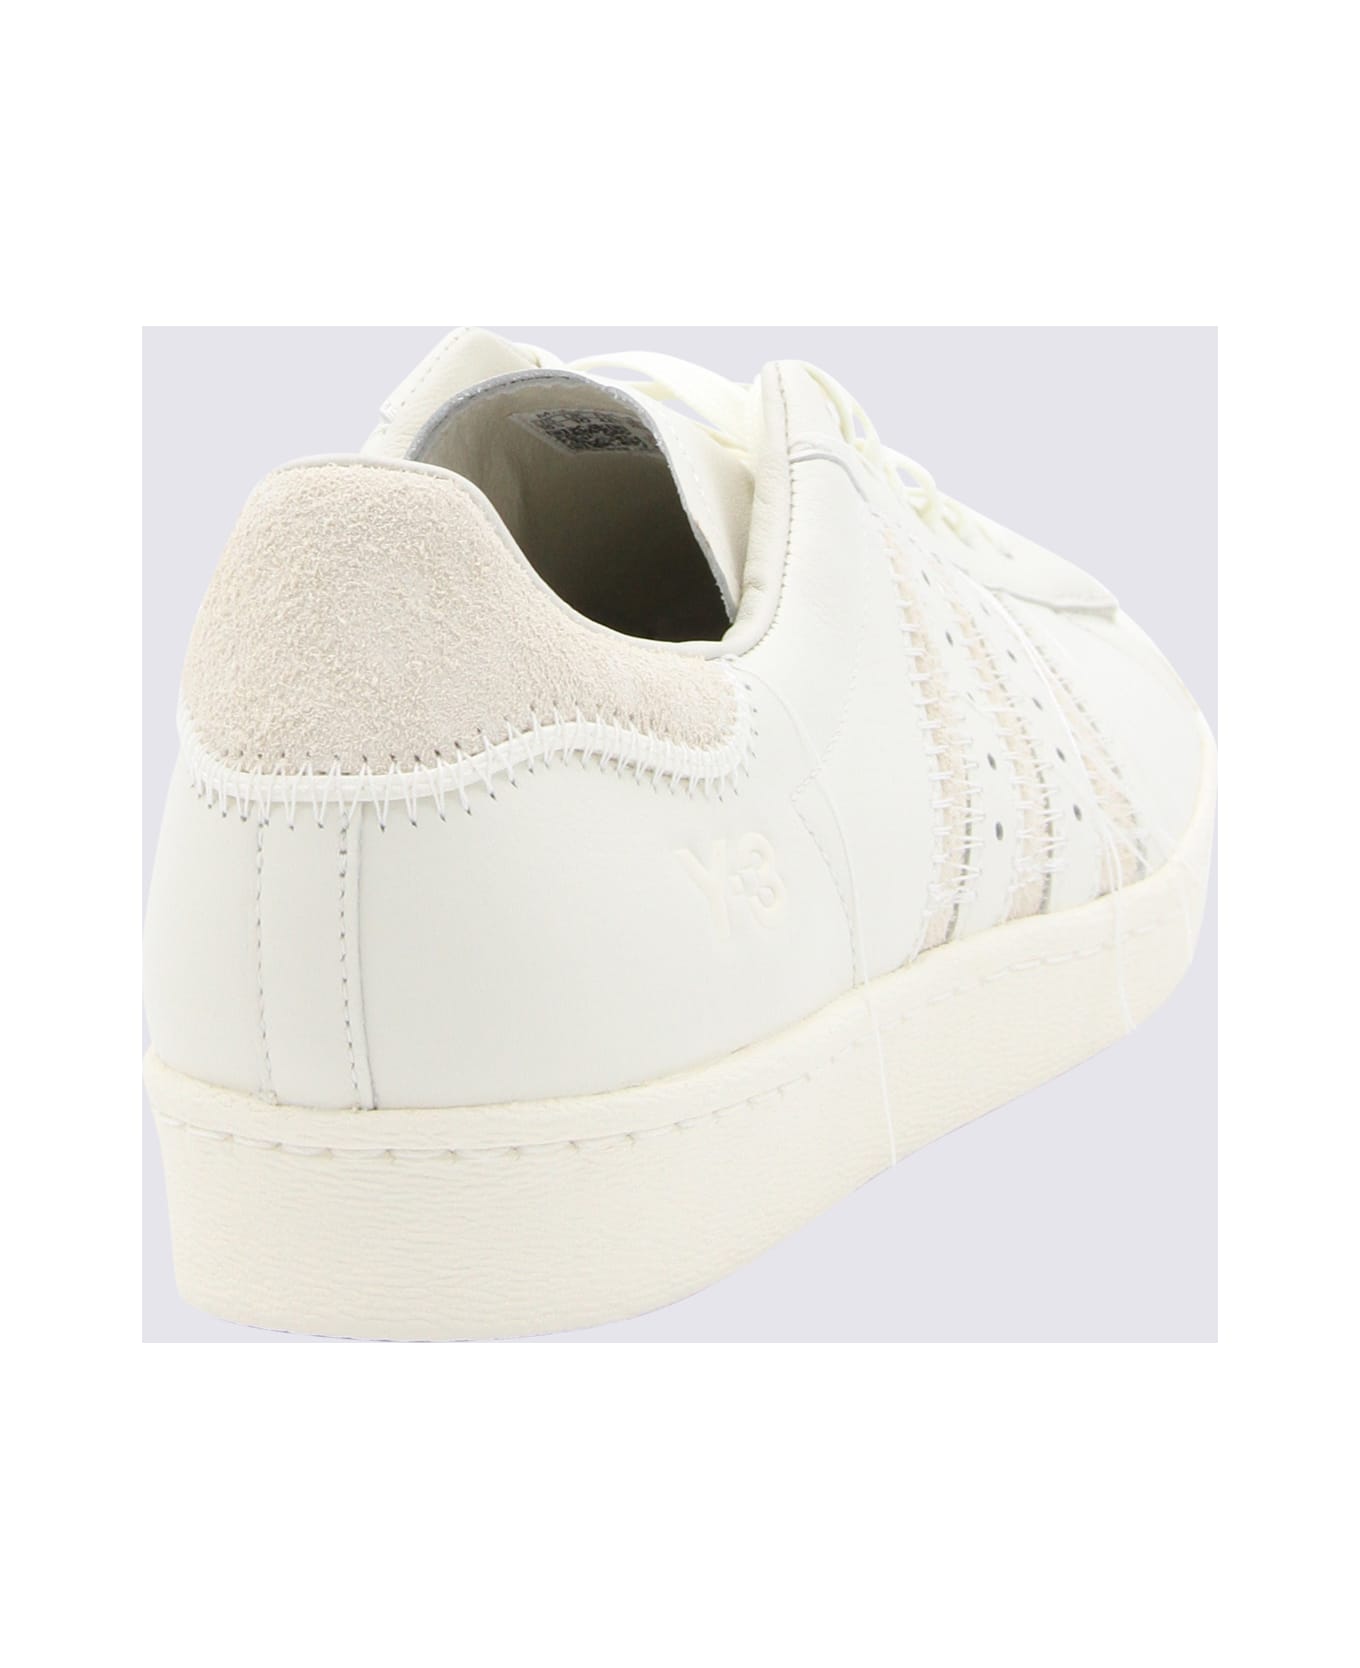 Y-3 White Leather And Beige Suede Superstar Sneakers - Beige スニーカー